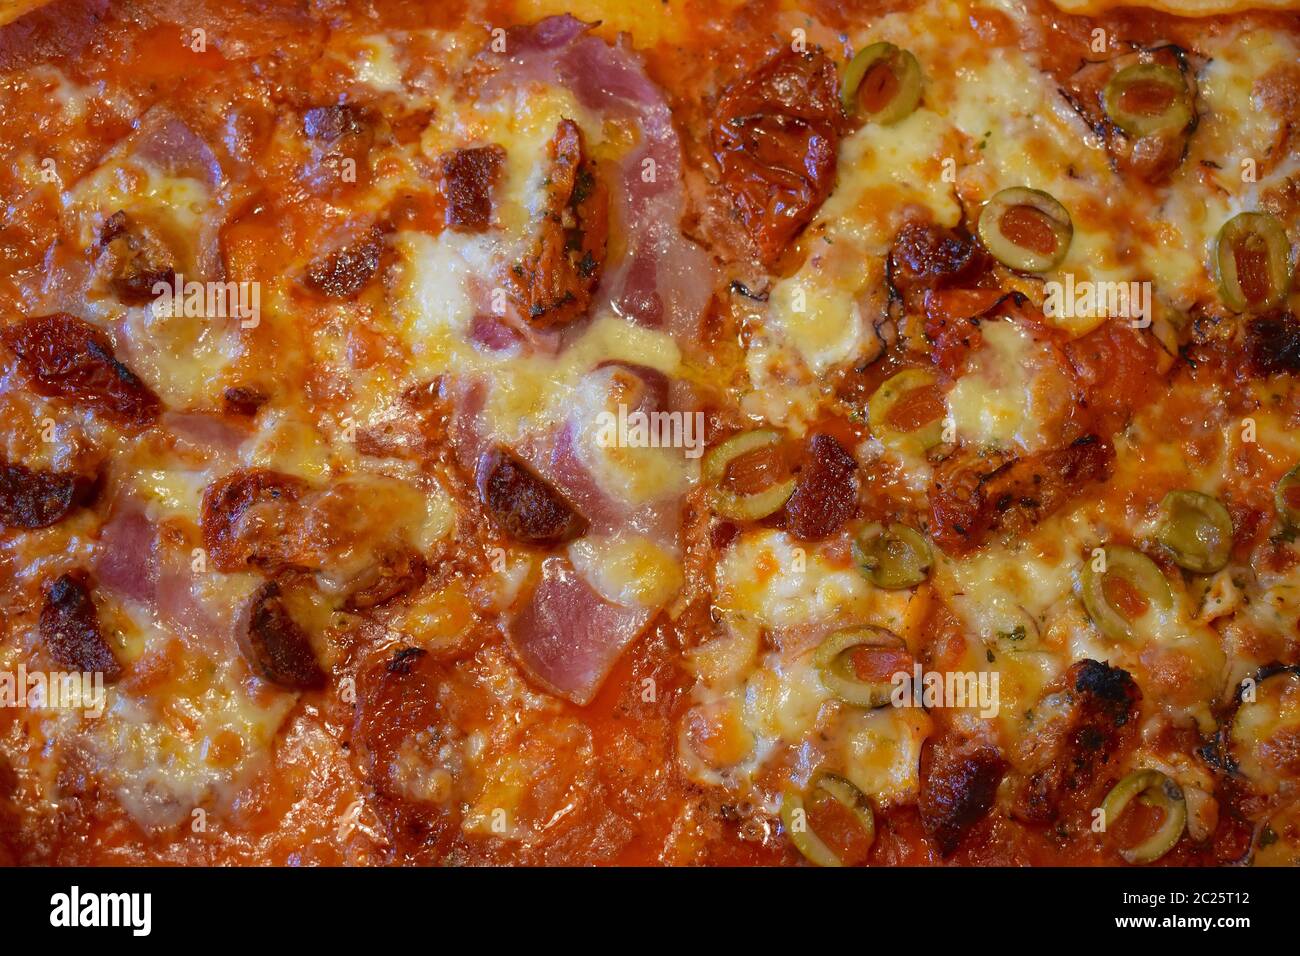 Home cooked half seafood half meat feast pizza. Octopus carpaccio mozzarella stuffed olives bacon spicy chorizo sausage all with melted cheese on top. Stock Photo